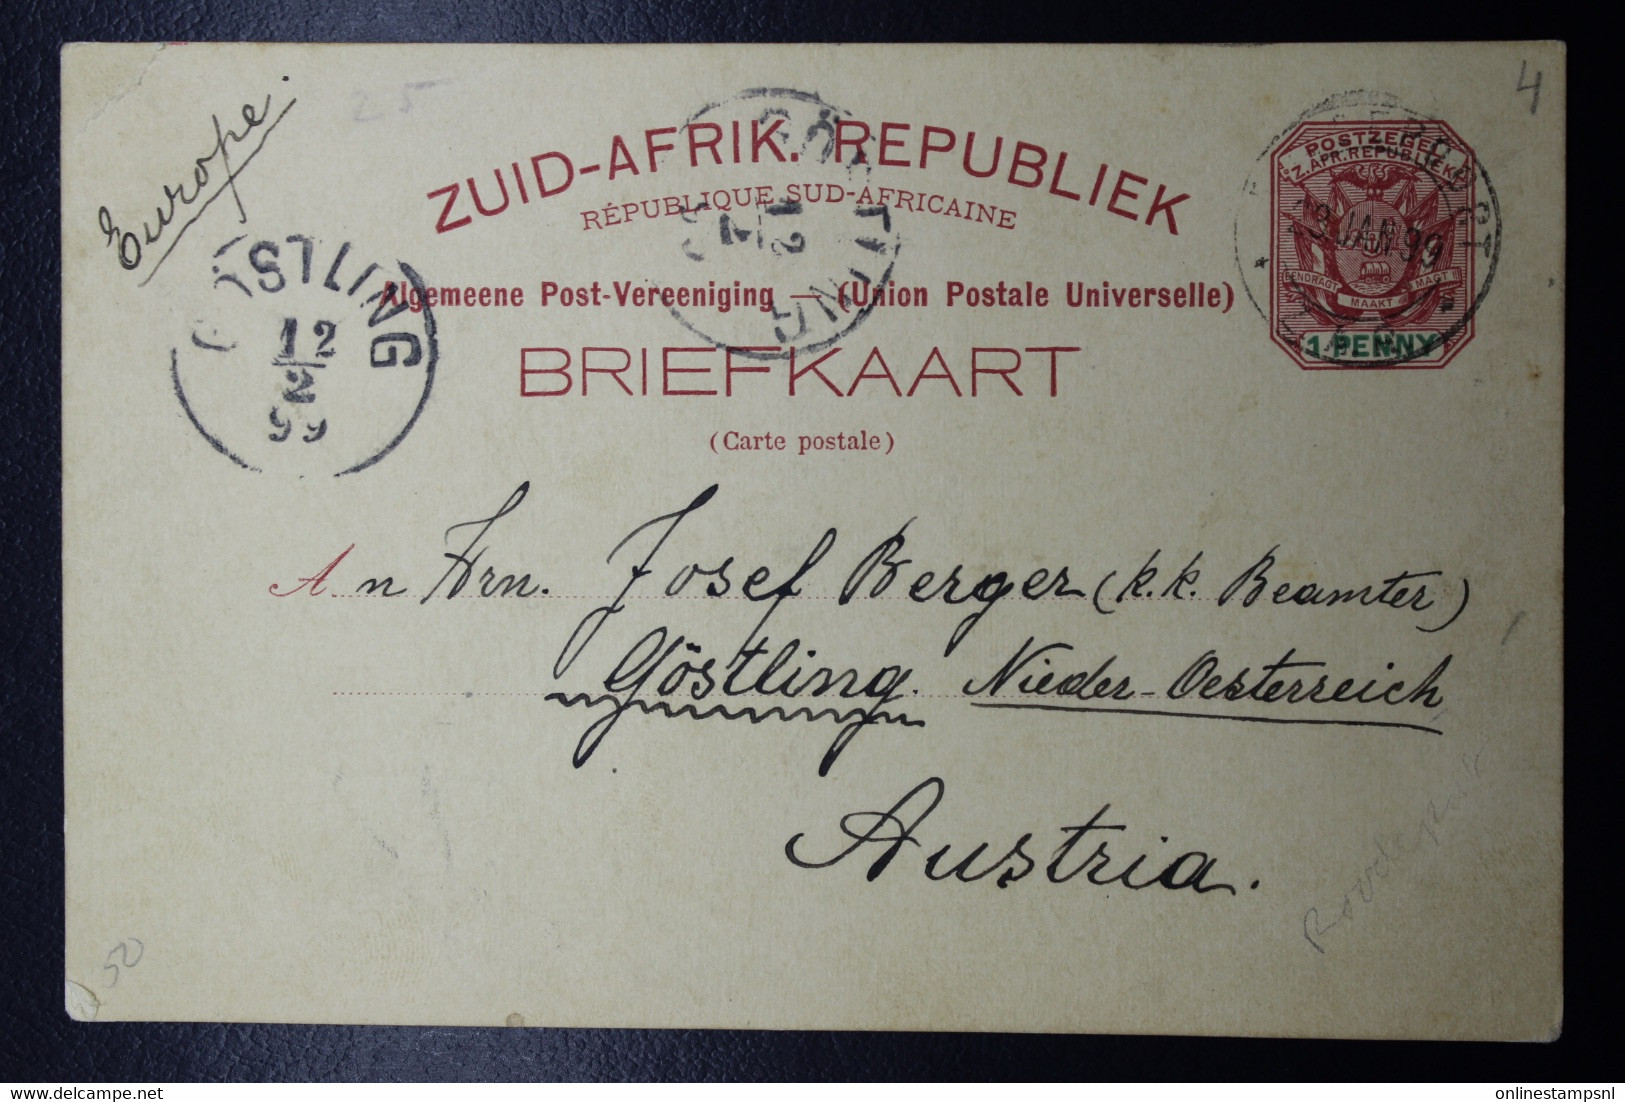 South Africa: Postcard Roodepoort  -> Göstling - Austria 1899 - Covers & Documents